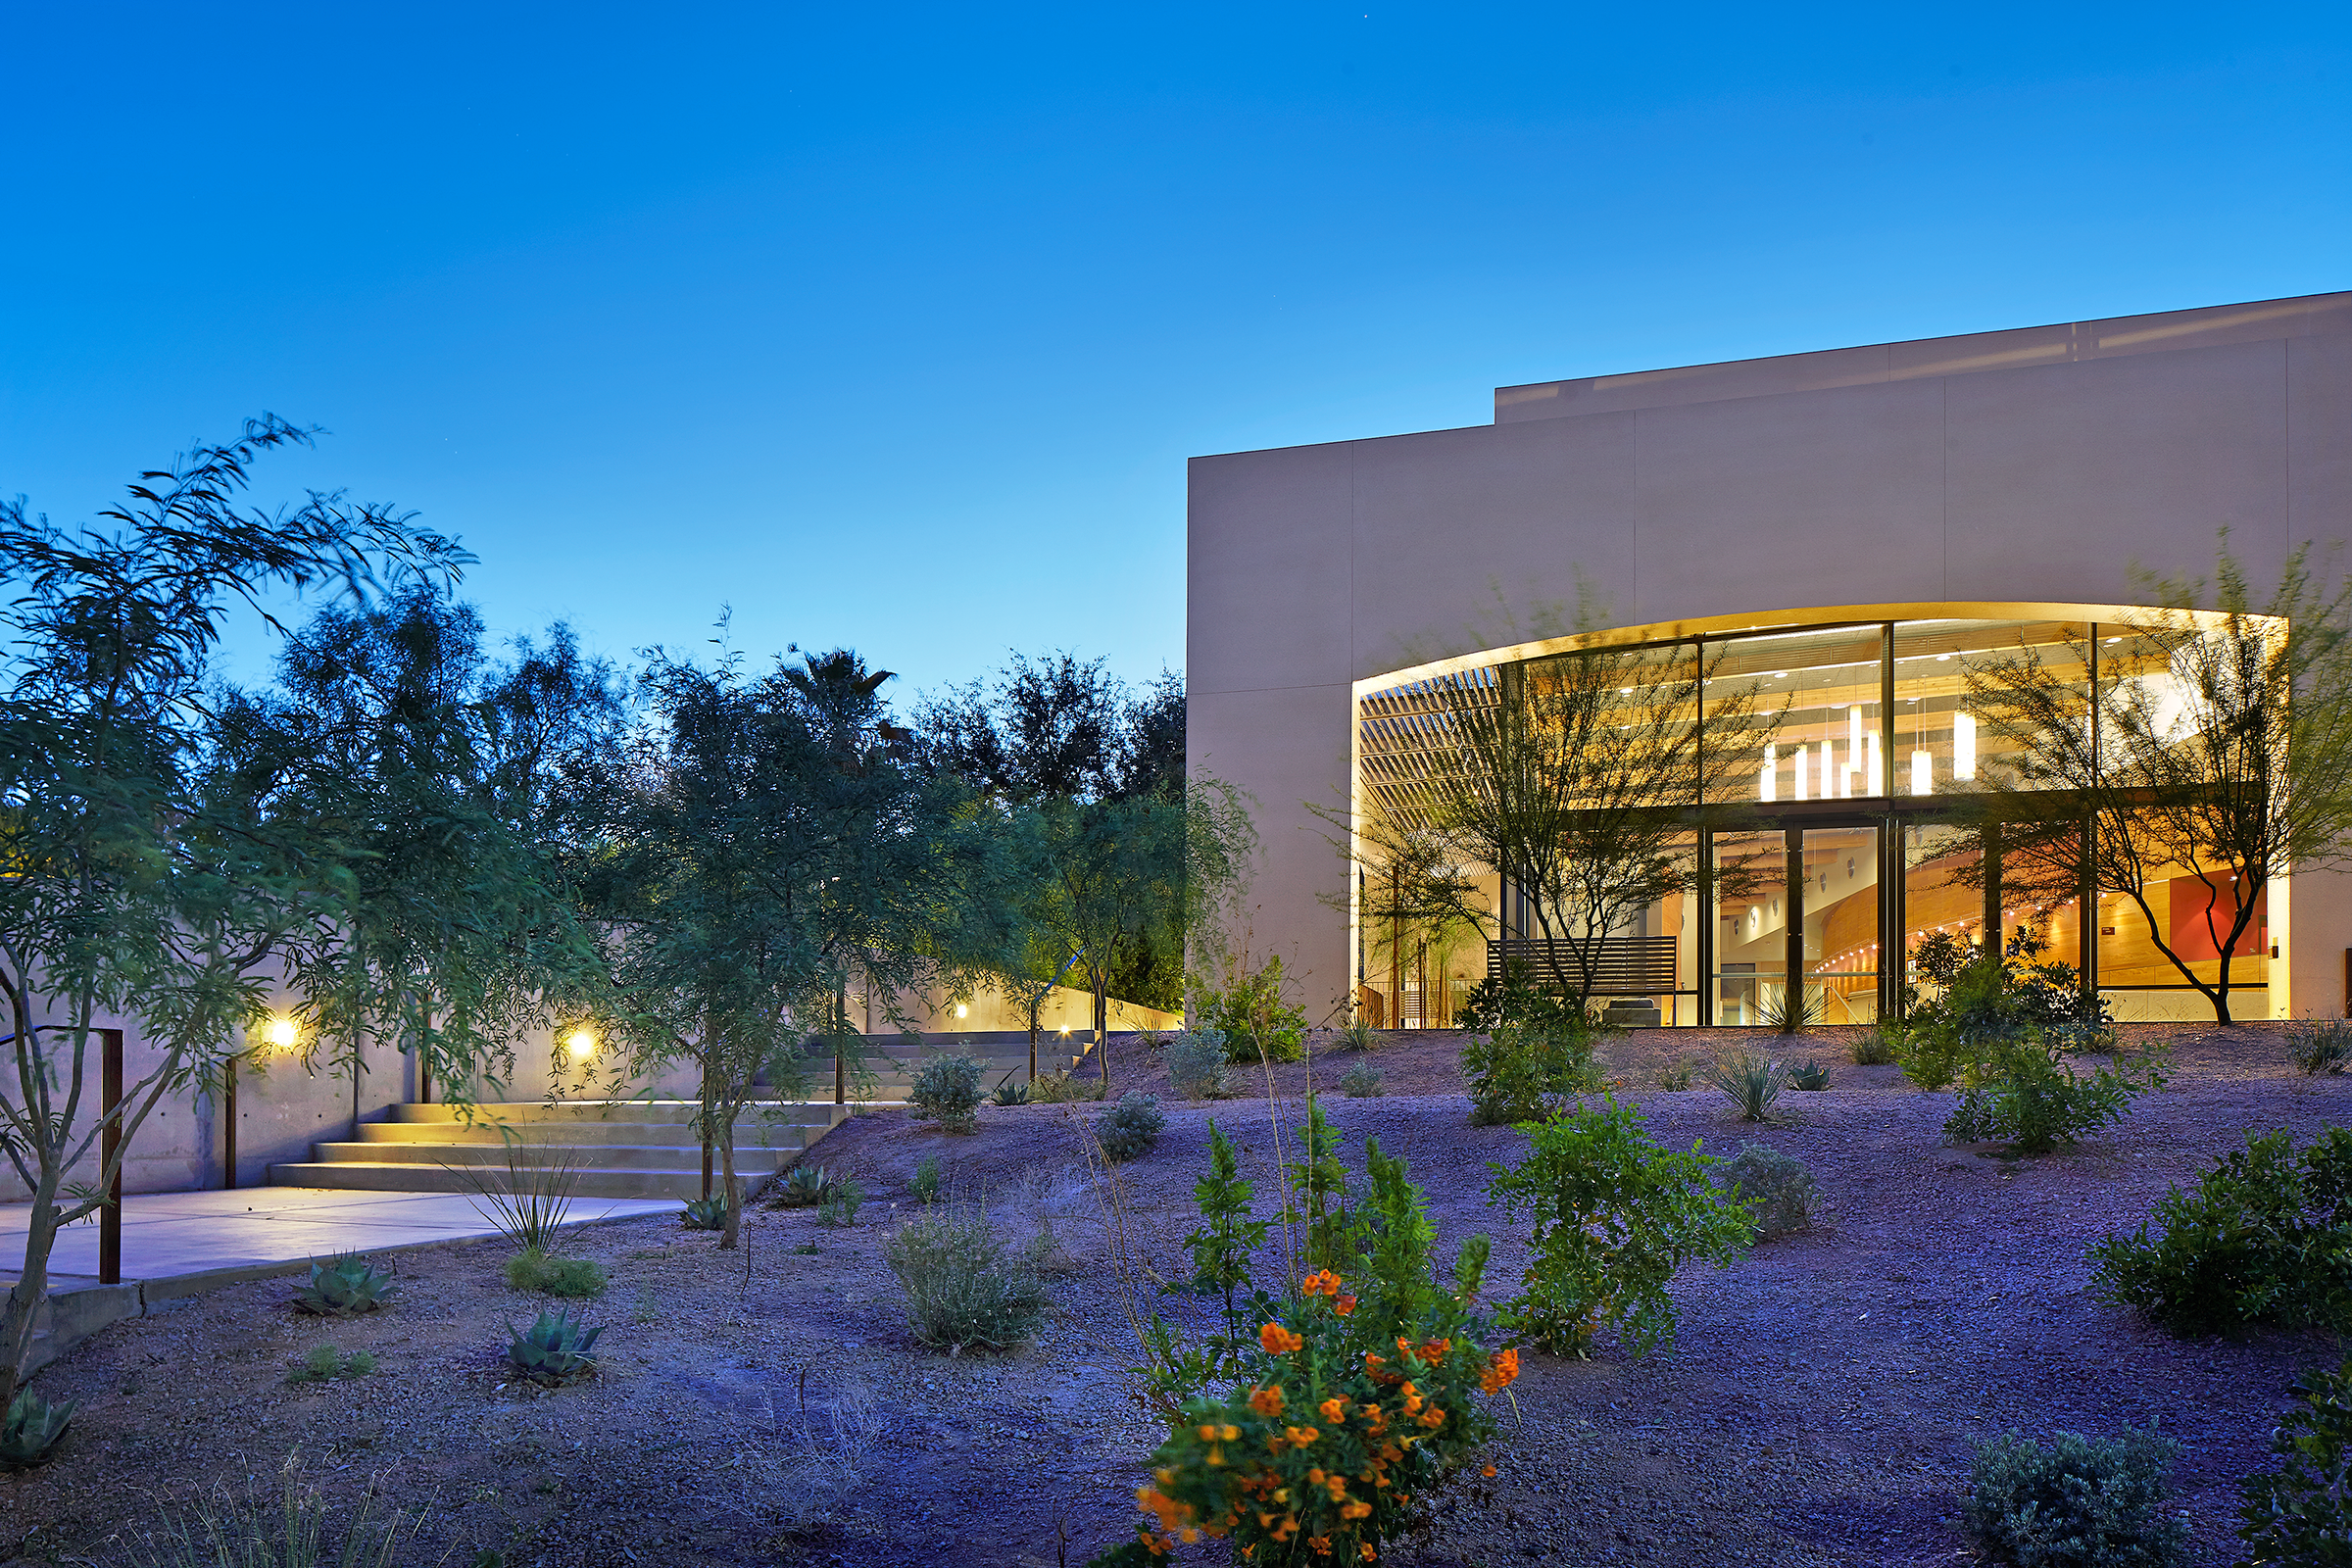 Central Arizona College Don P. Pence Center for Visual & Performing Arts